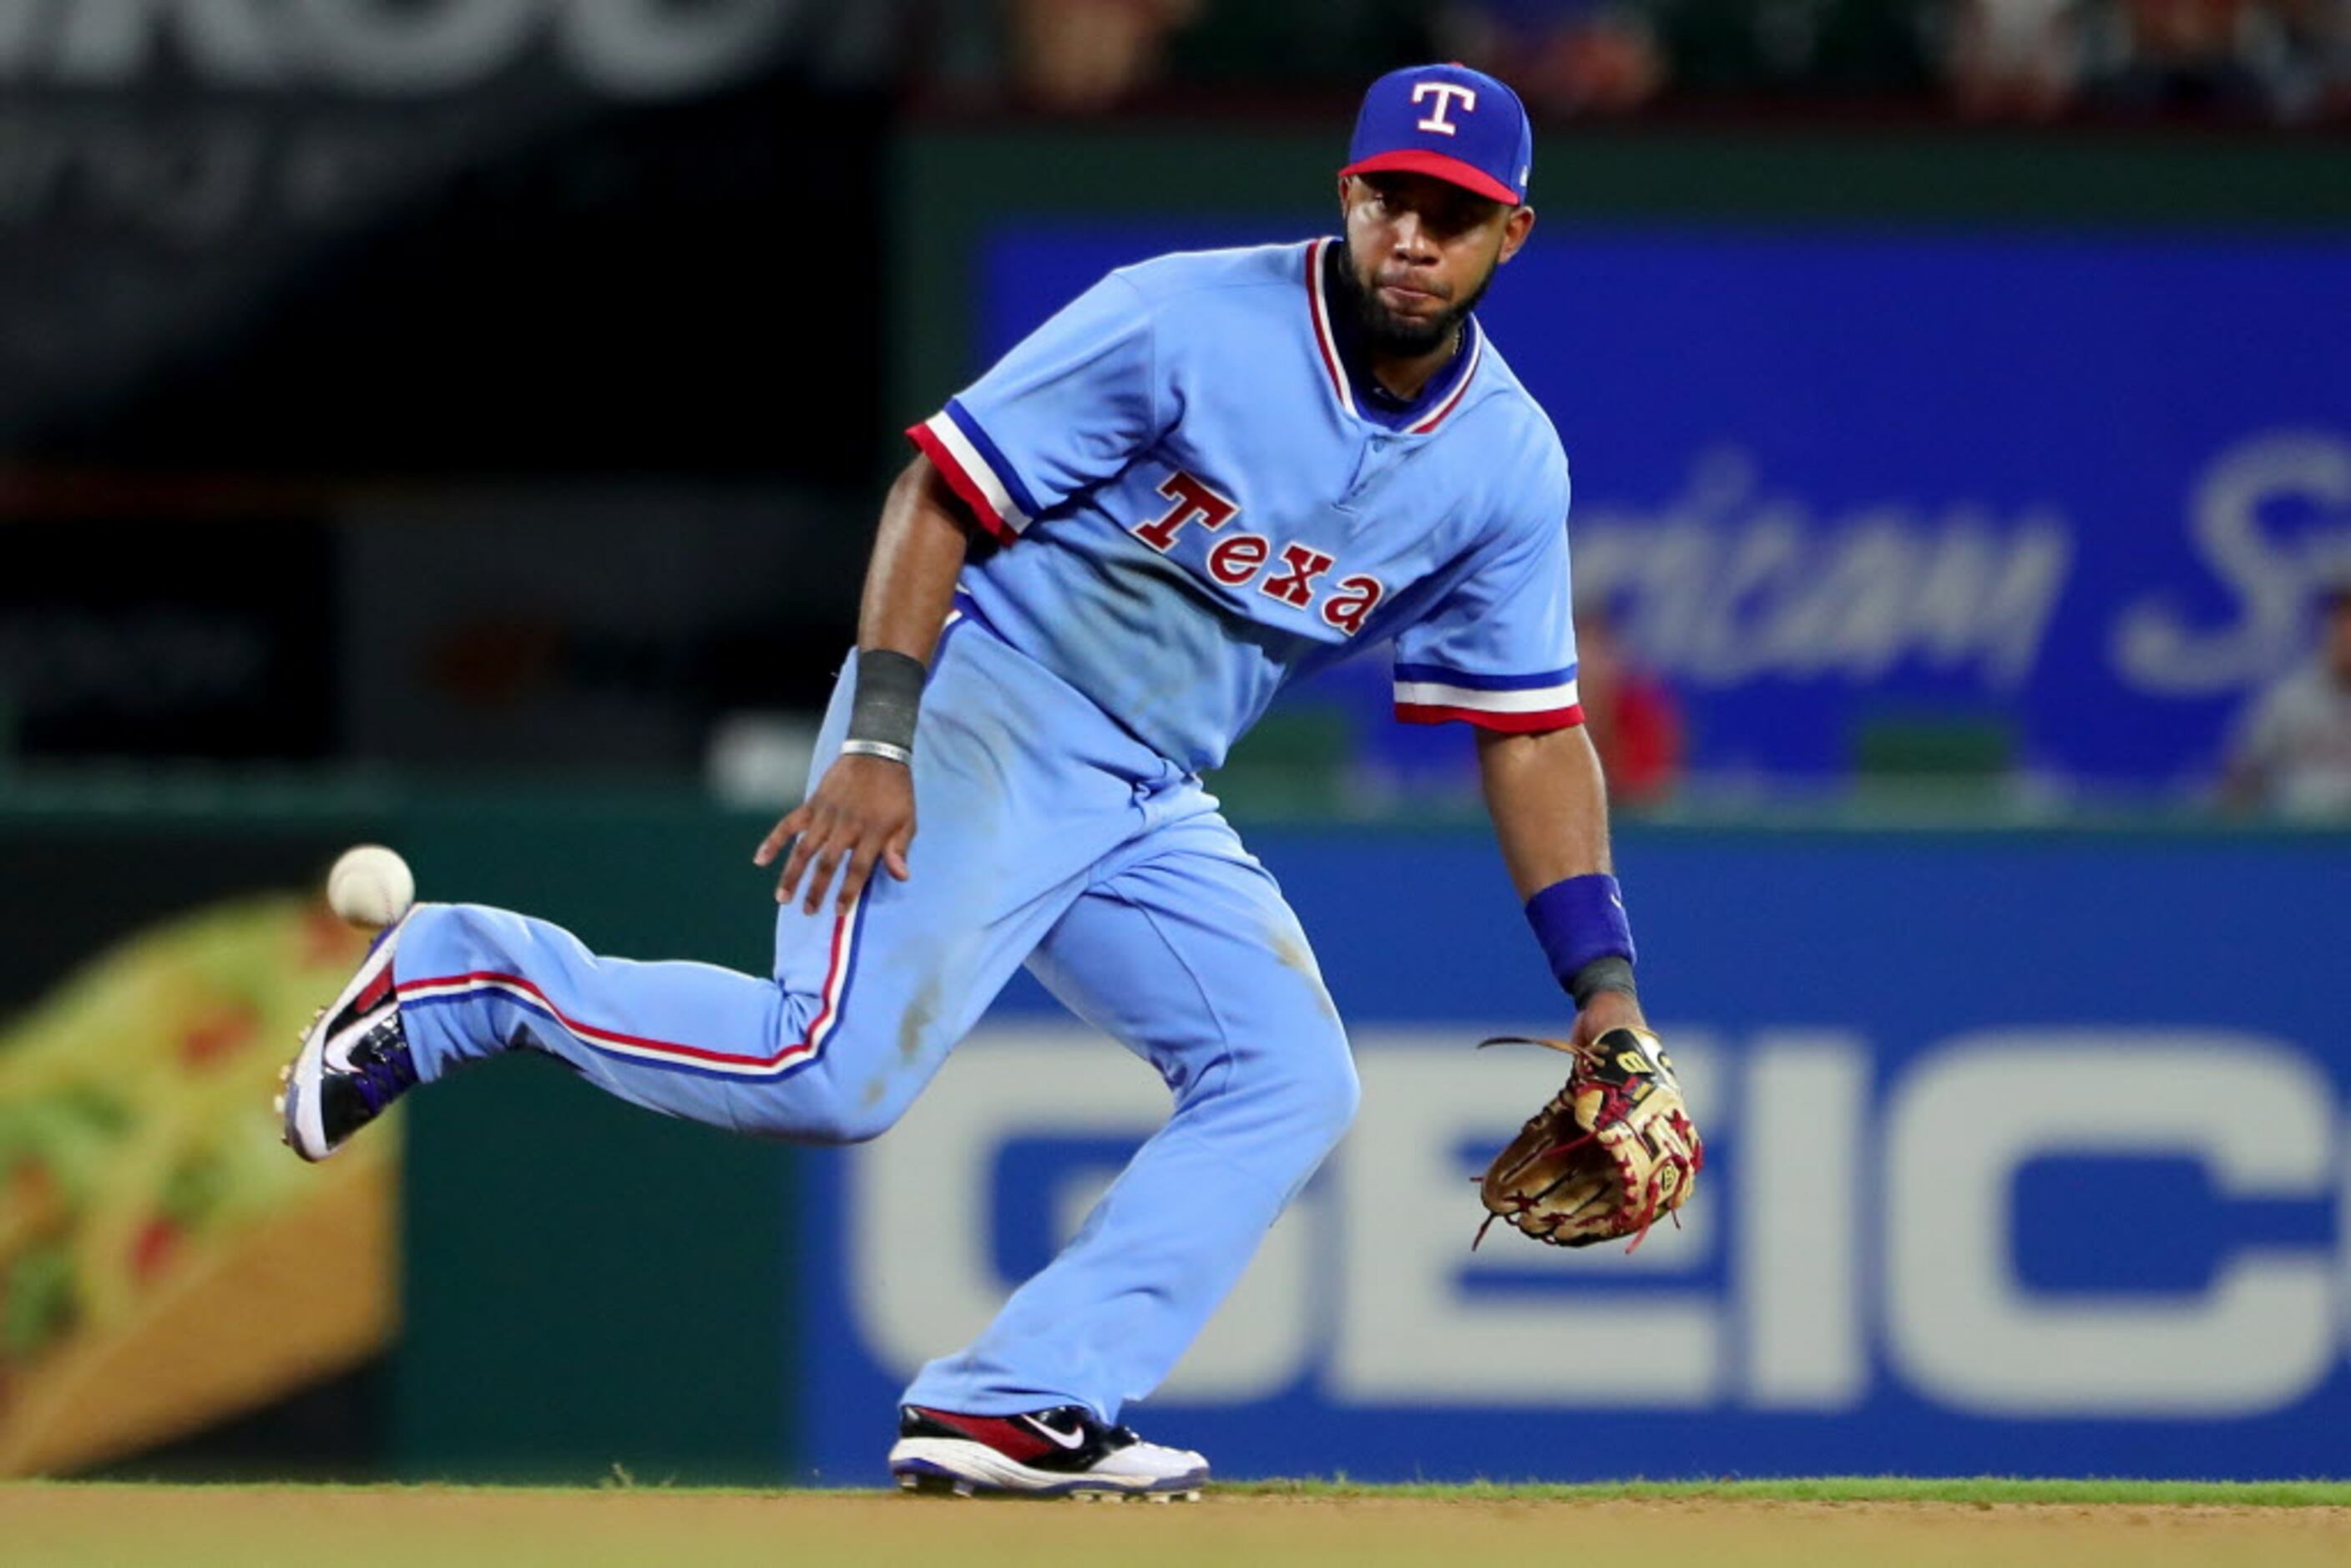 Who will be baseball's next Ironman after Elvis Andrus?